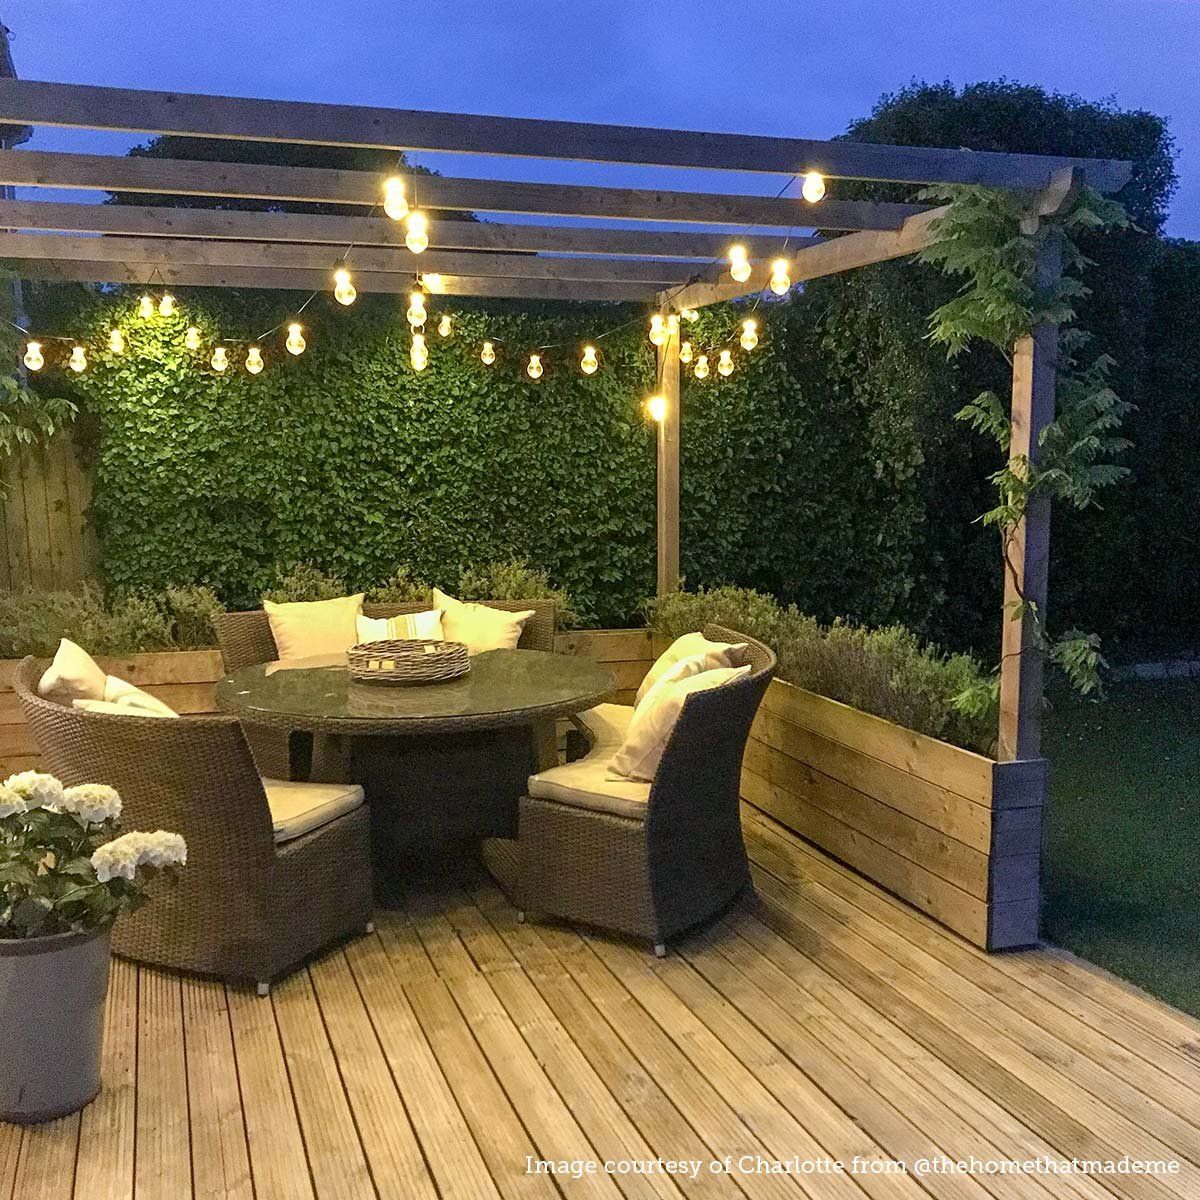 Transform Your Outdoor Space with LED
Landscape Lighting